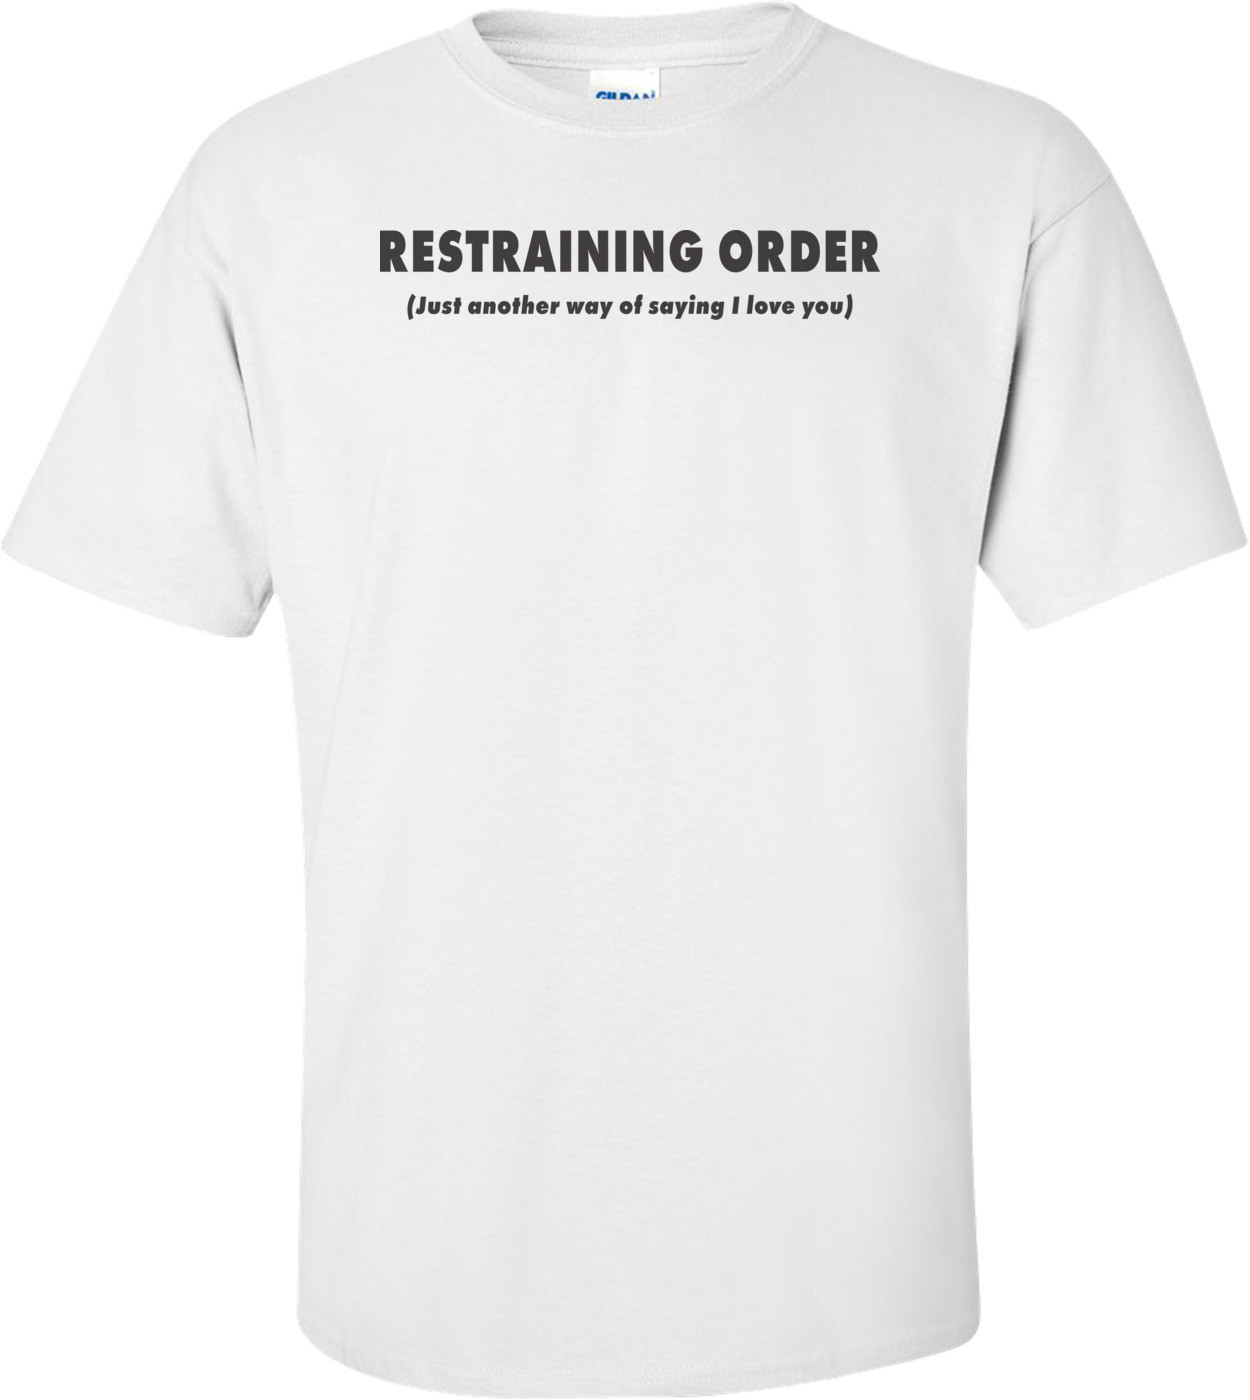 Restraining Order Just Another Way Of Saying I Love You T-shirt